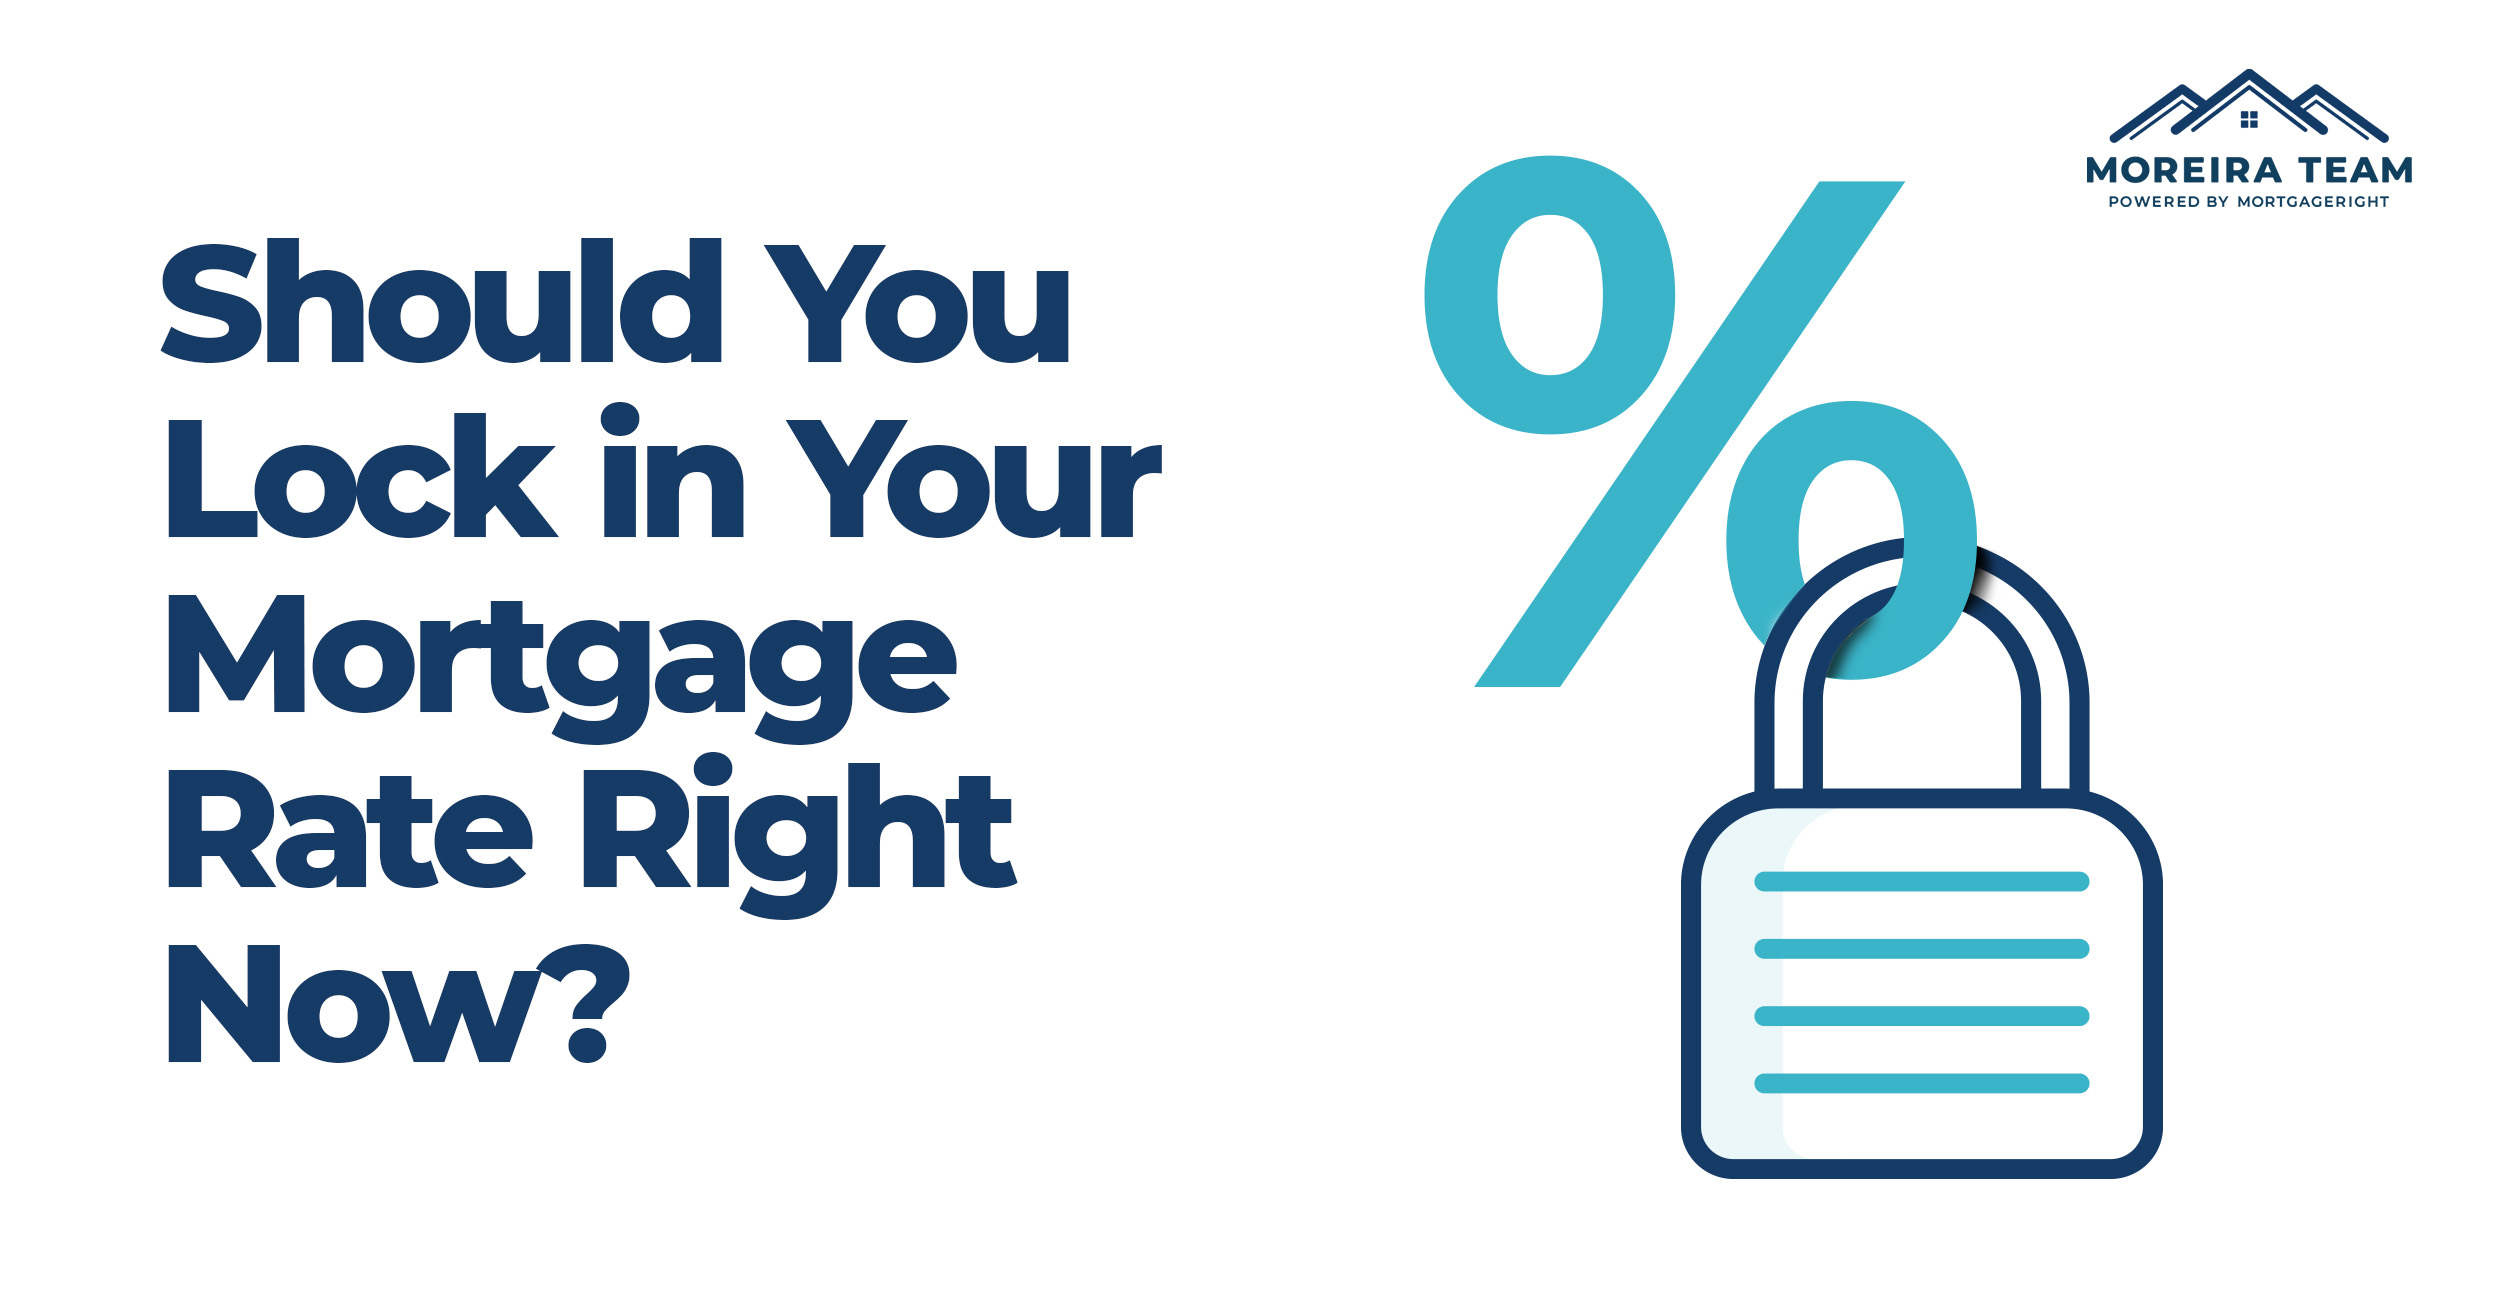 Should You Lock in Your Mortgage Rate Right Now?